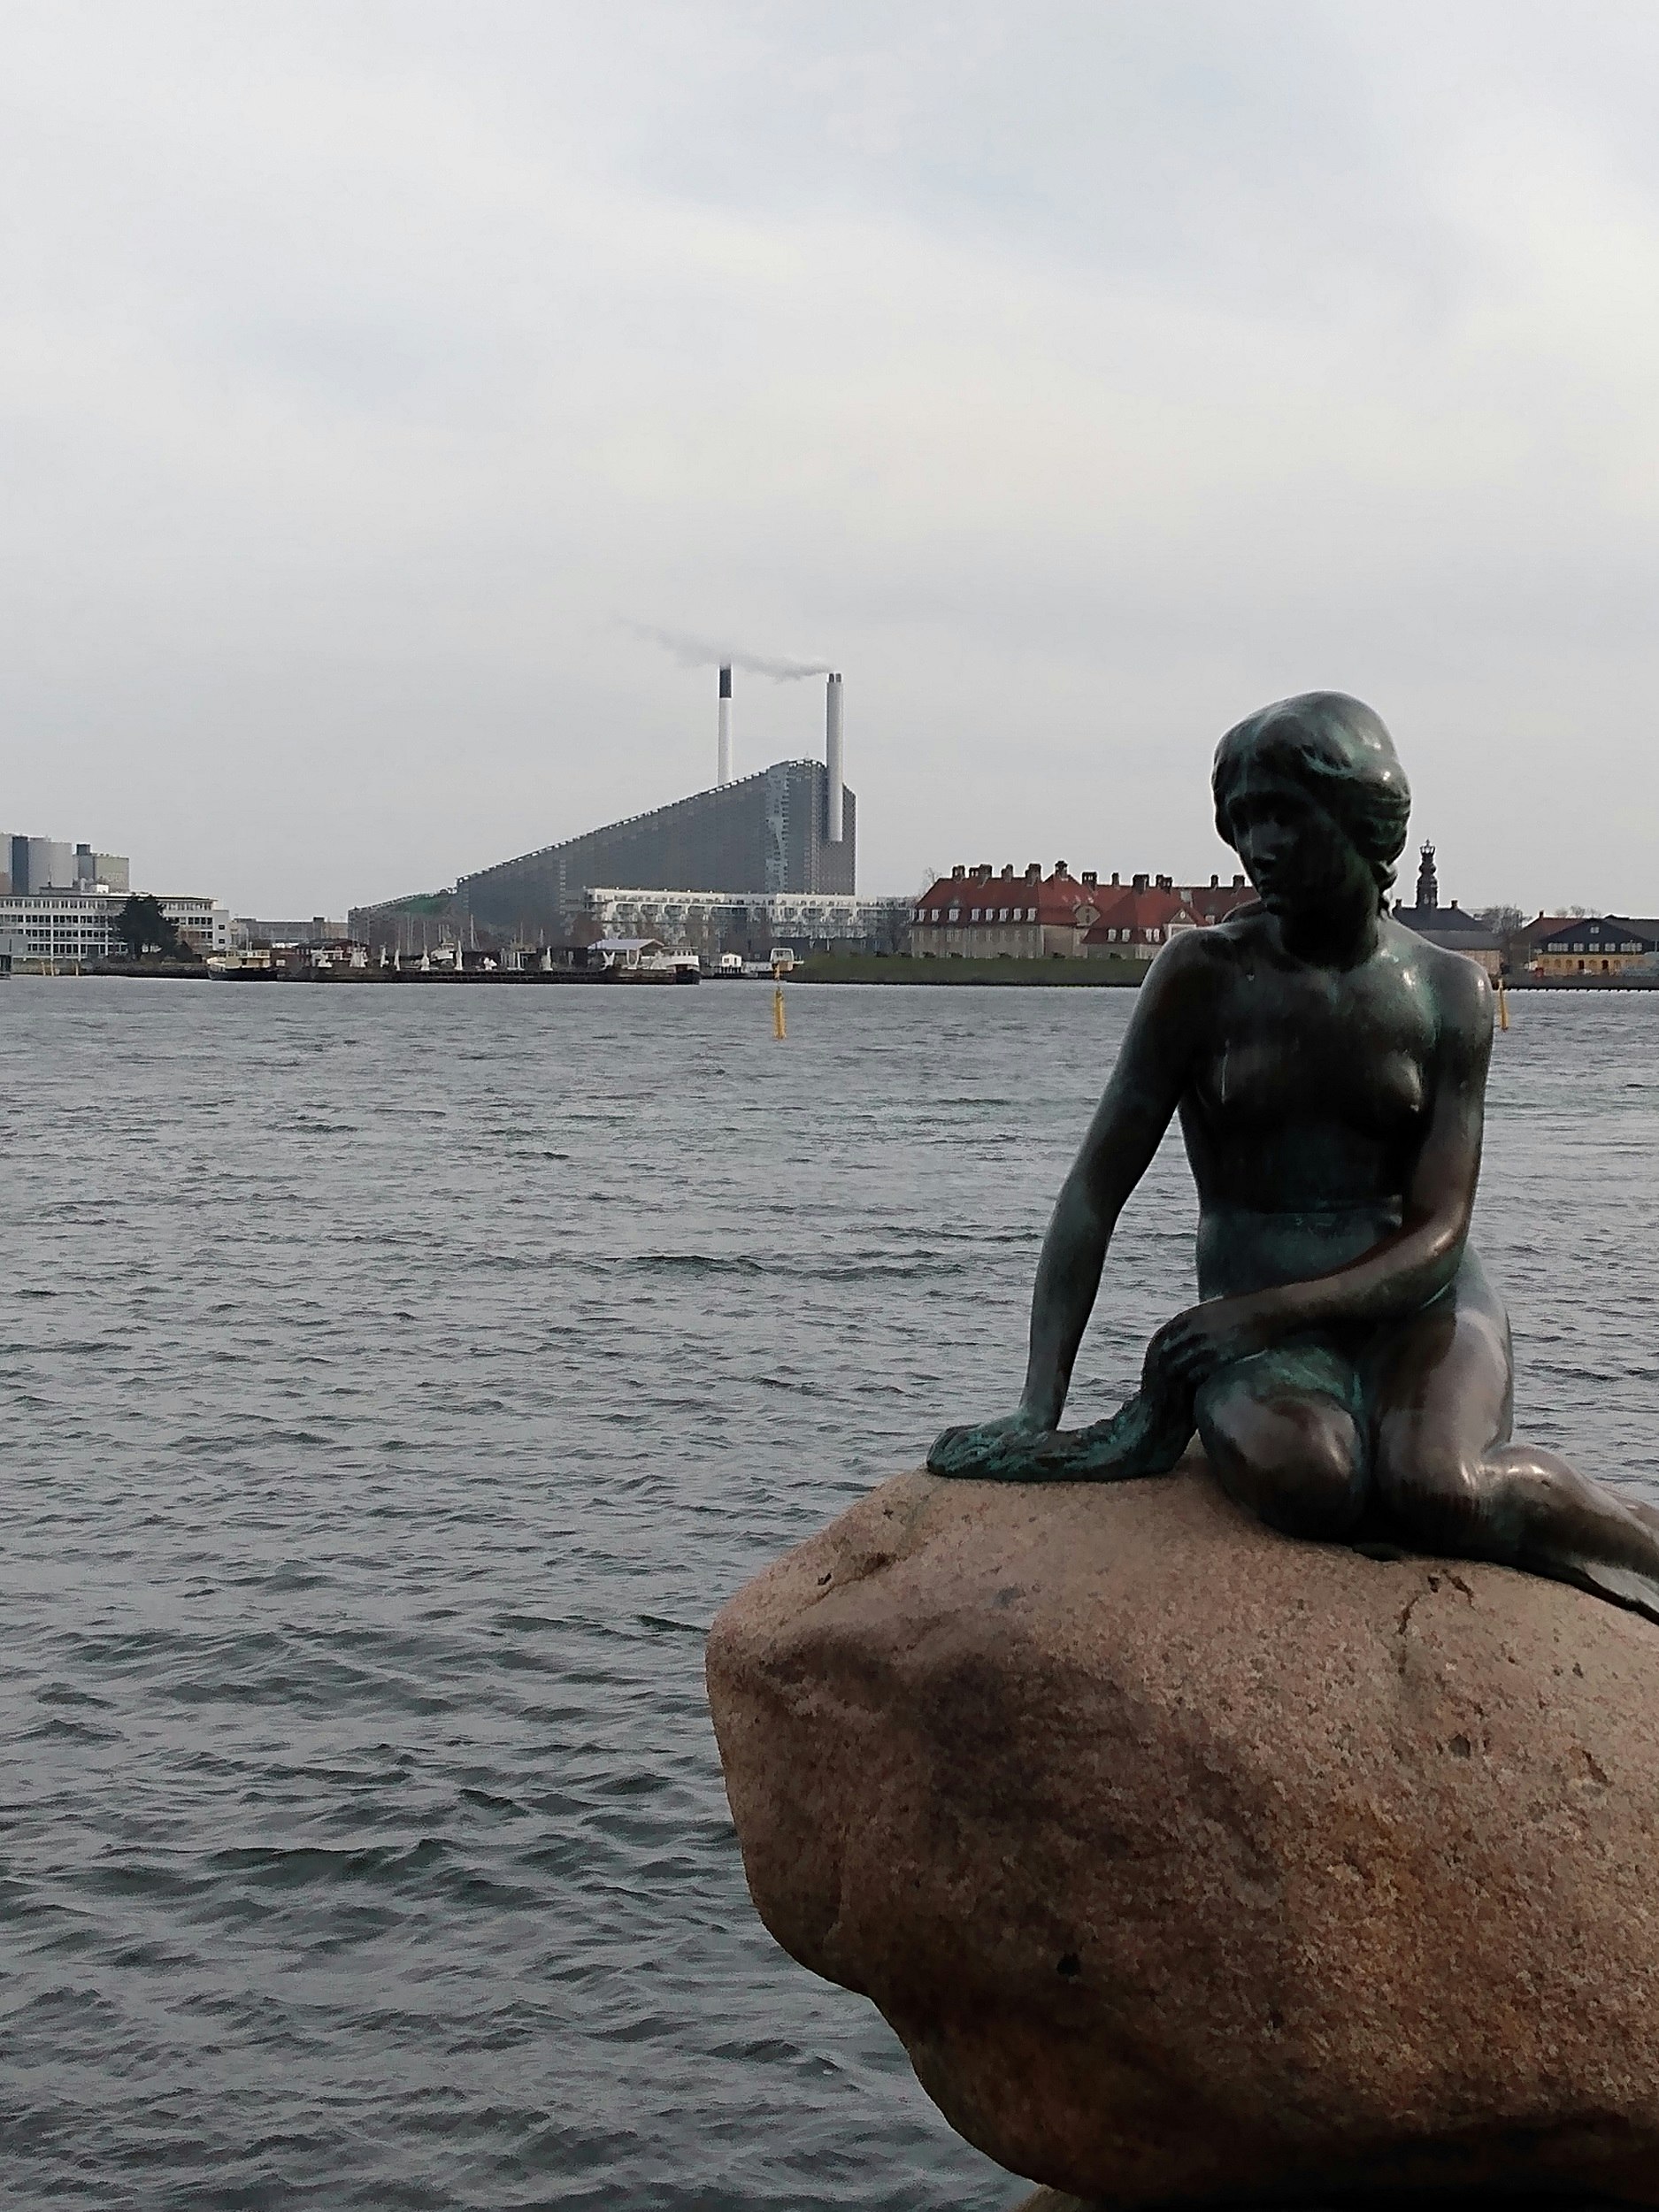 The famous bronze statue of the Little Mermaid sat on a rock by the sea, with a power station with two large chimneys across the water.